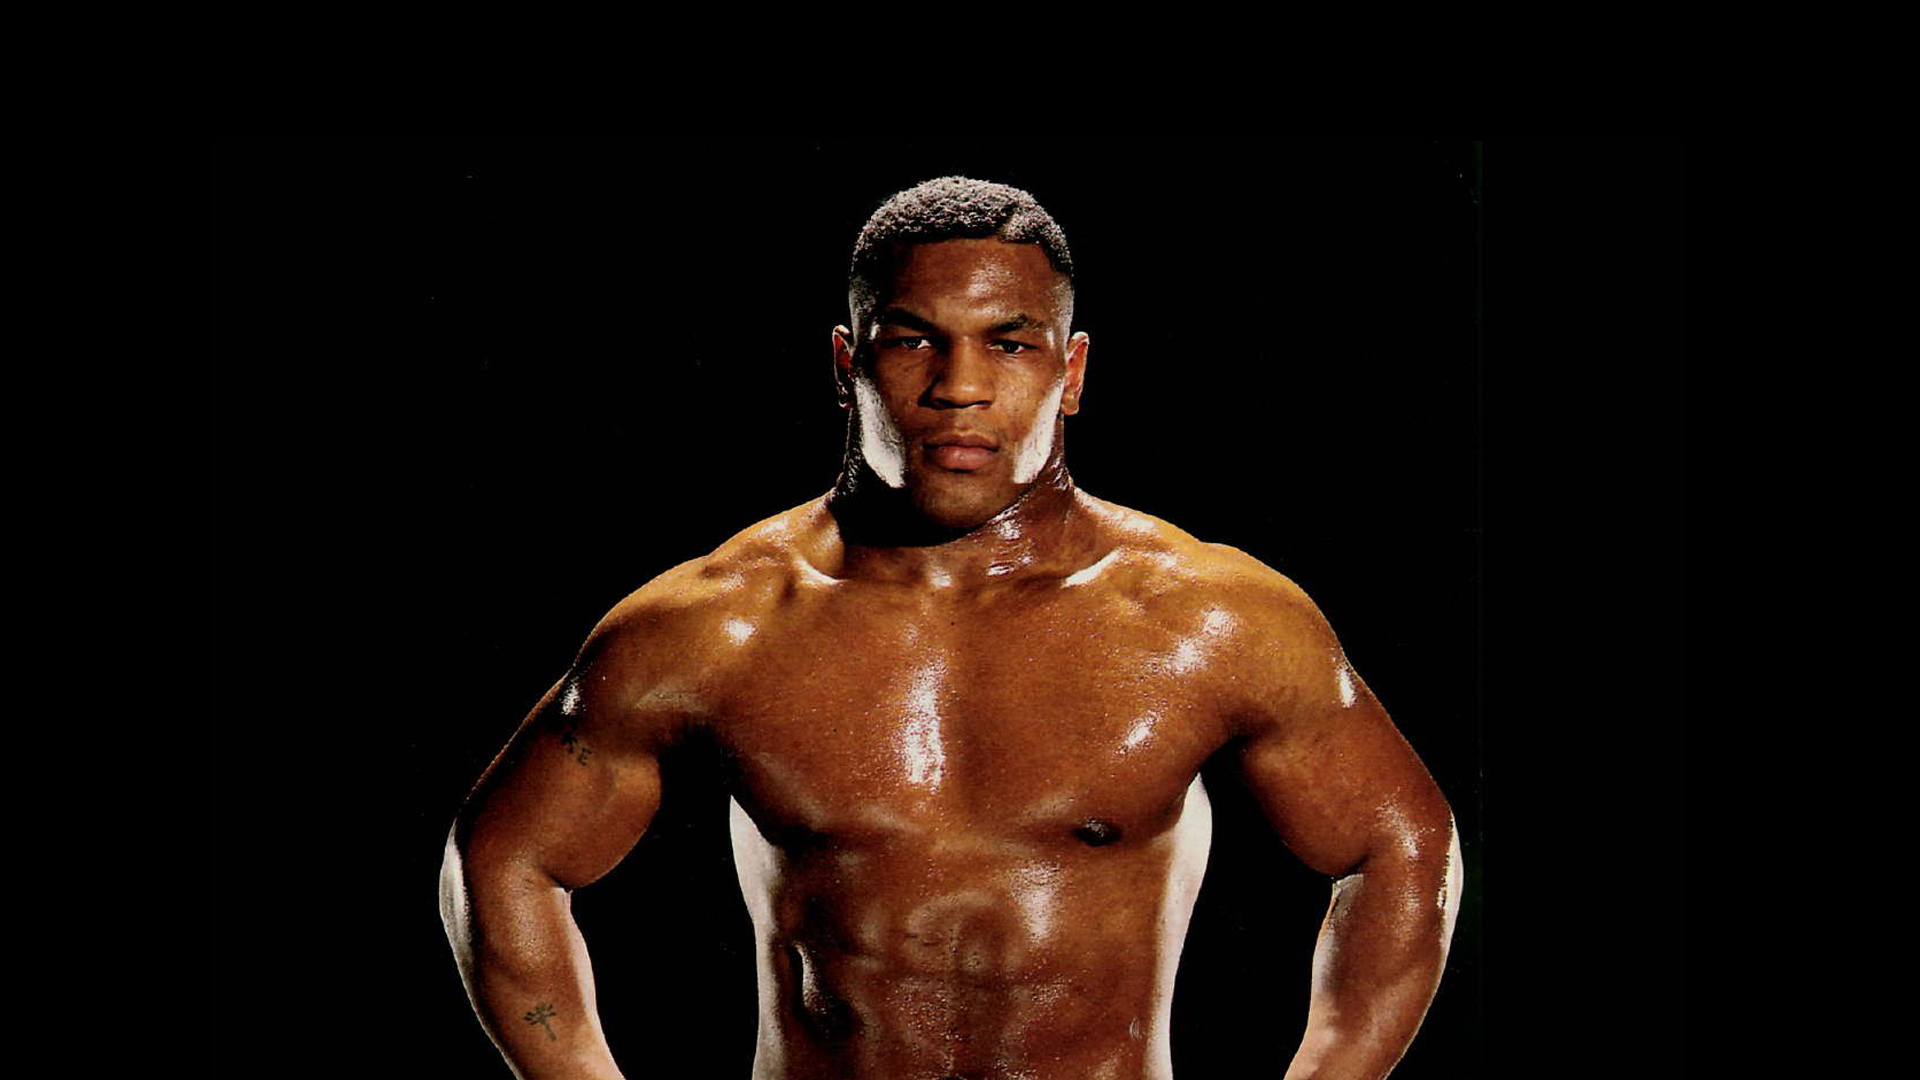 _Young_Mike_Tyson_053508_.jpg